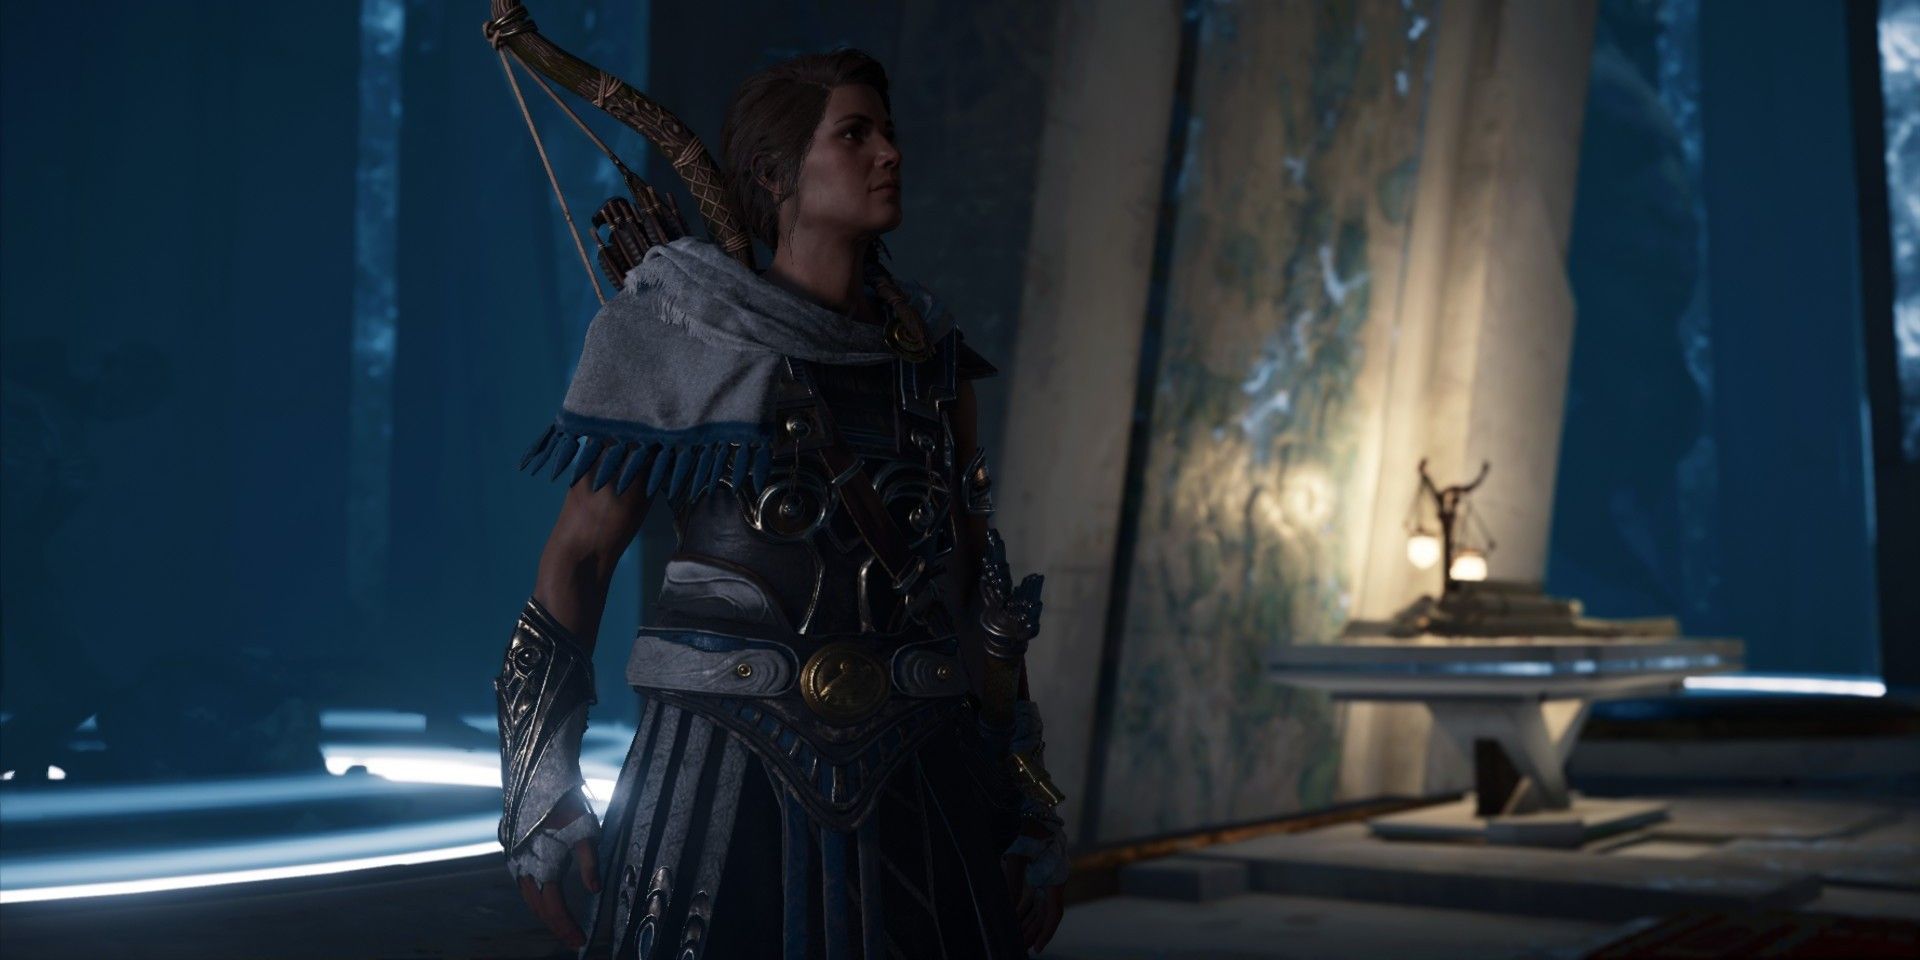 Kassandra exploring a temple at night in Assassin's Creed Odyssey.